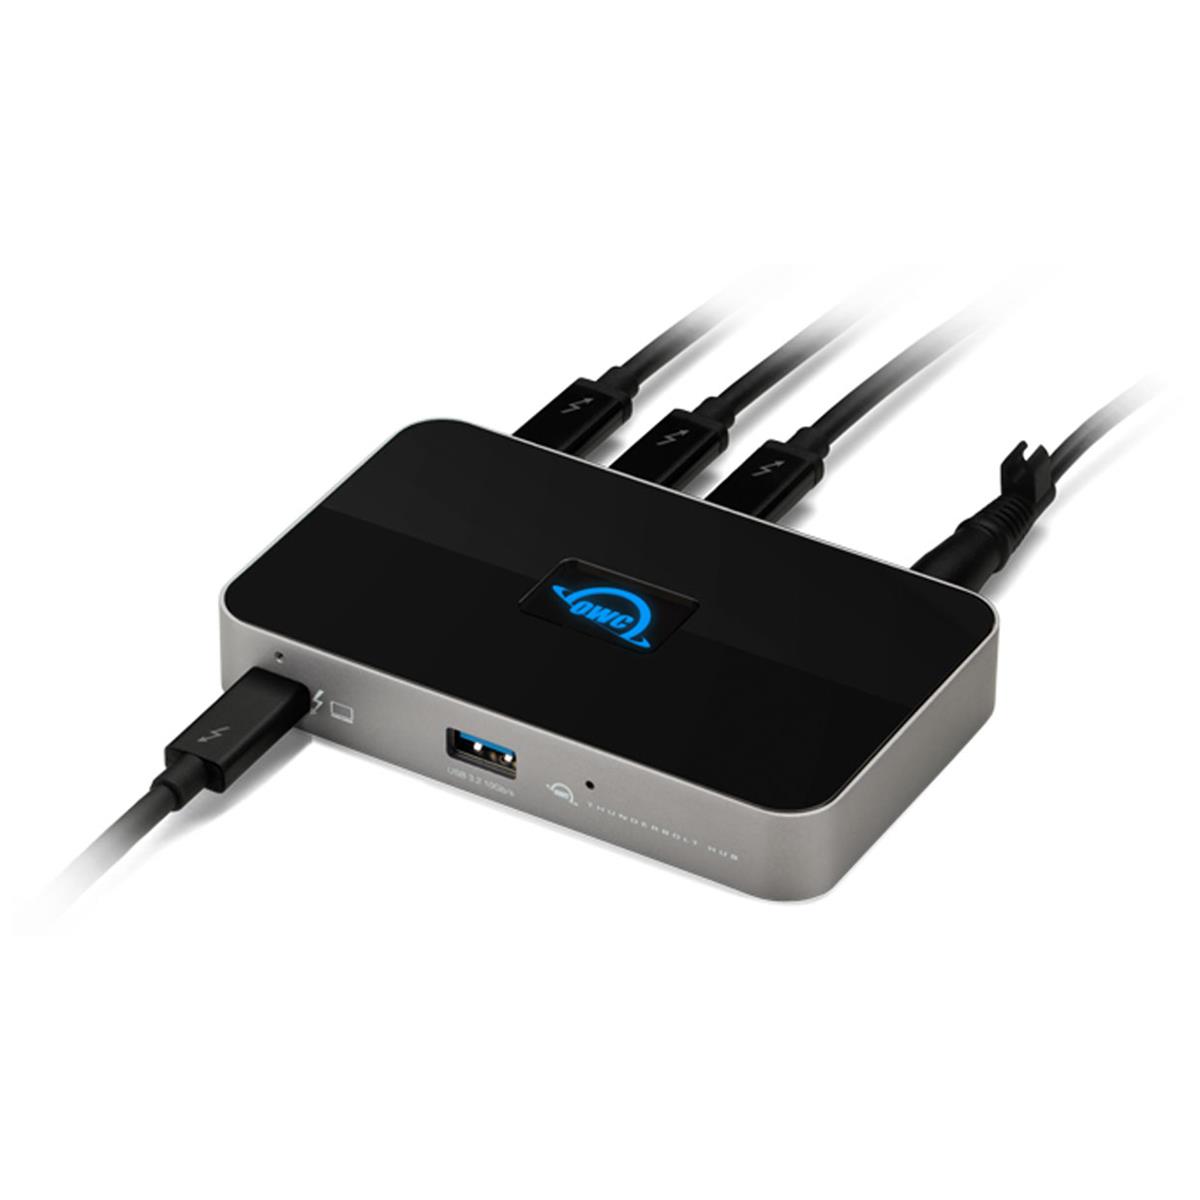 

OWC / Other World Computing OWC/Other World Computing 4-Port Thunderbolt Hub with Cable